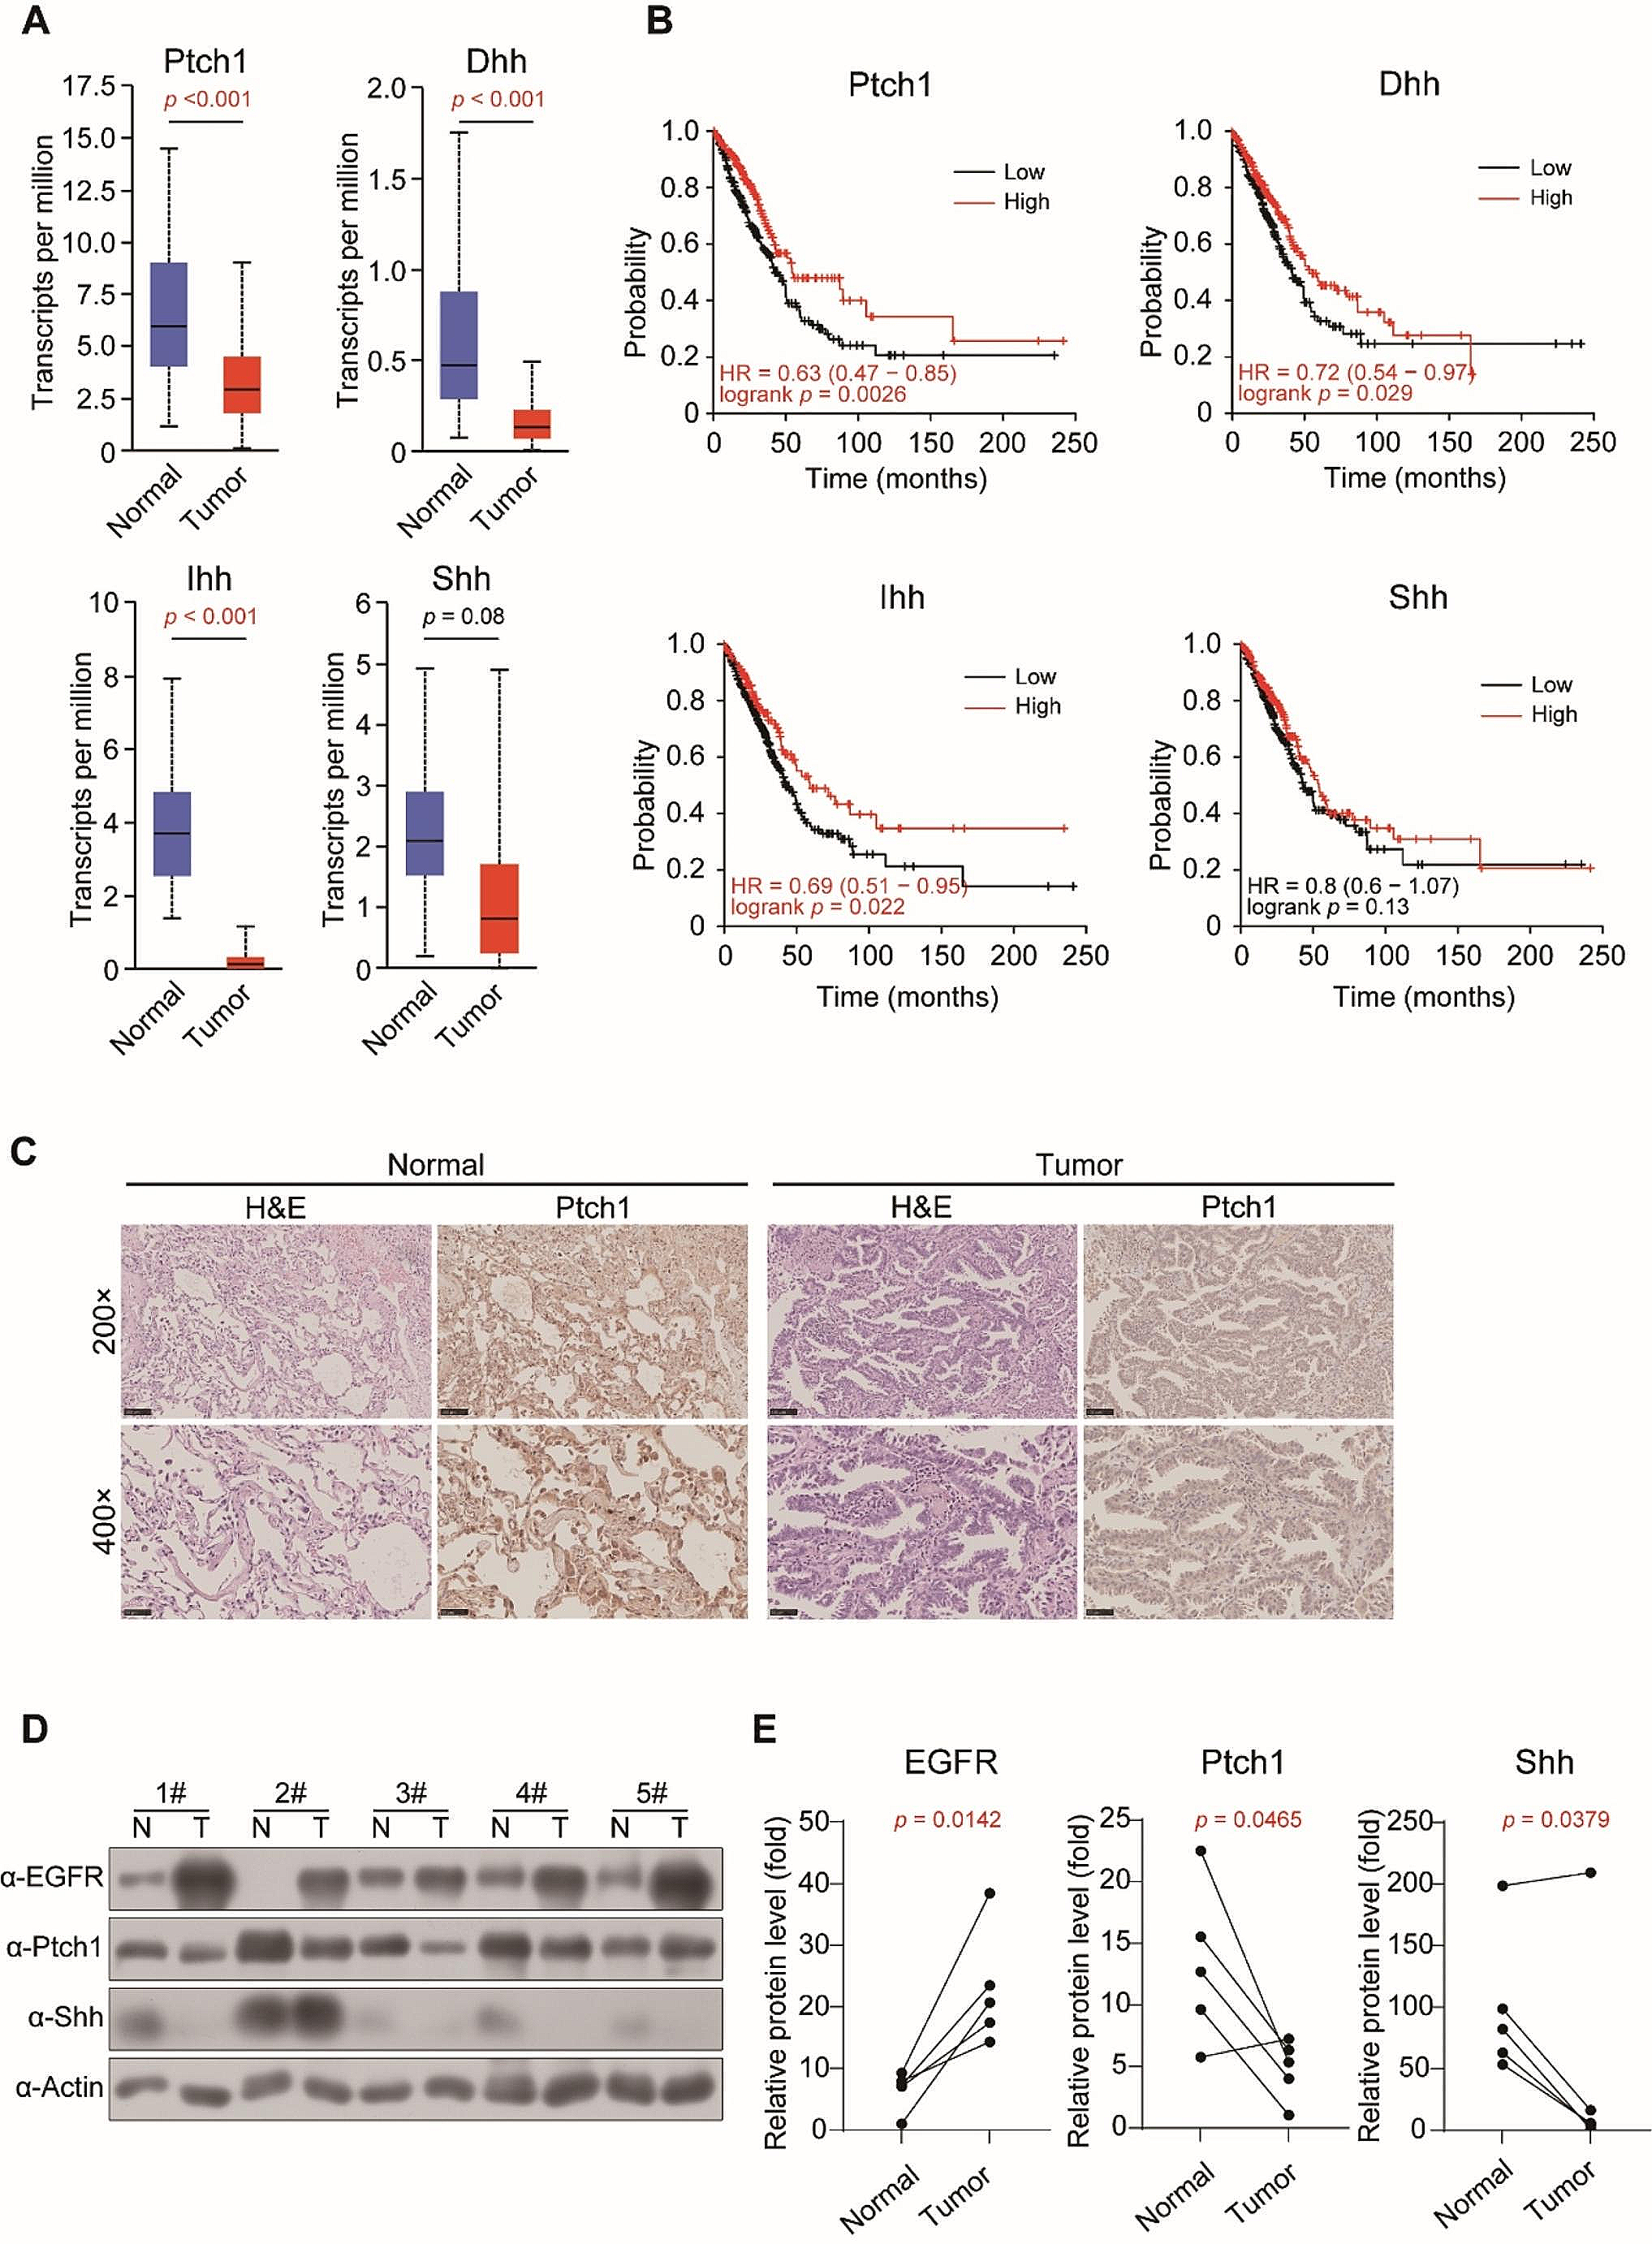 Hedgehog ligand and receptor cooperatively regulate EGFR stability and activity in non-small cell lung cancer